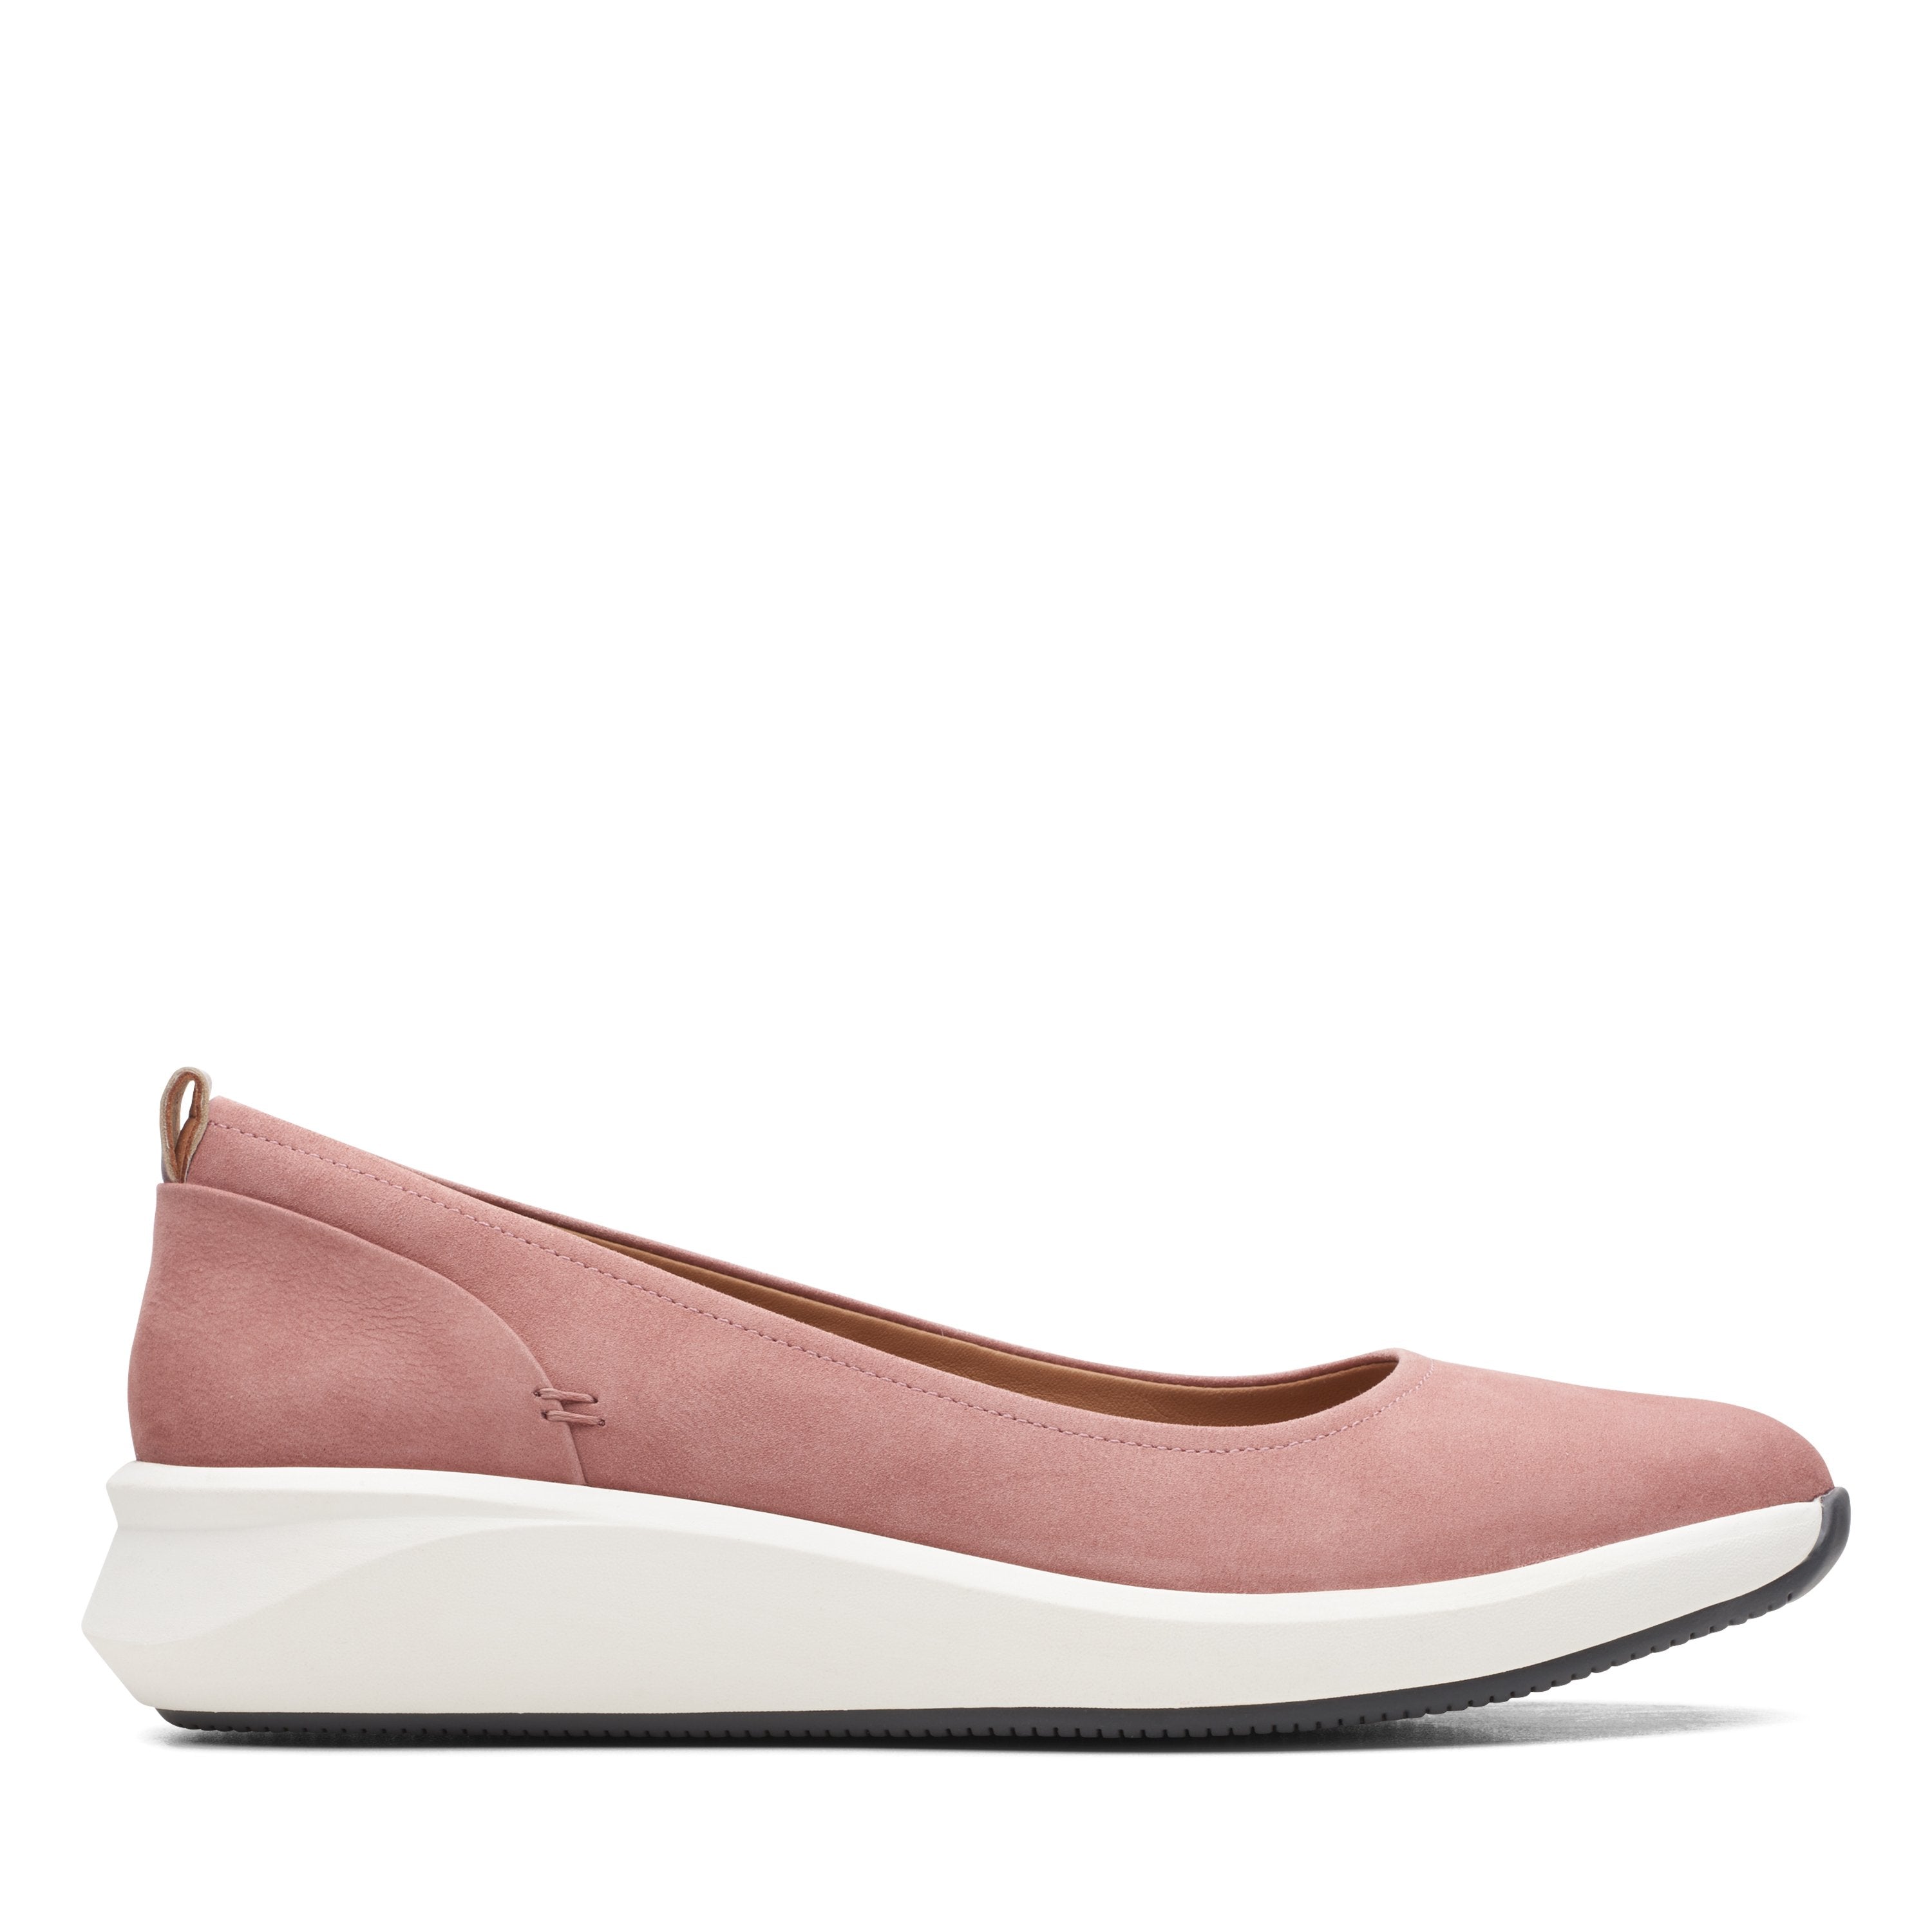 Clarks Unstructured Footwear For Women | Clarks Singapore